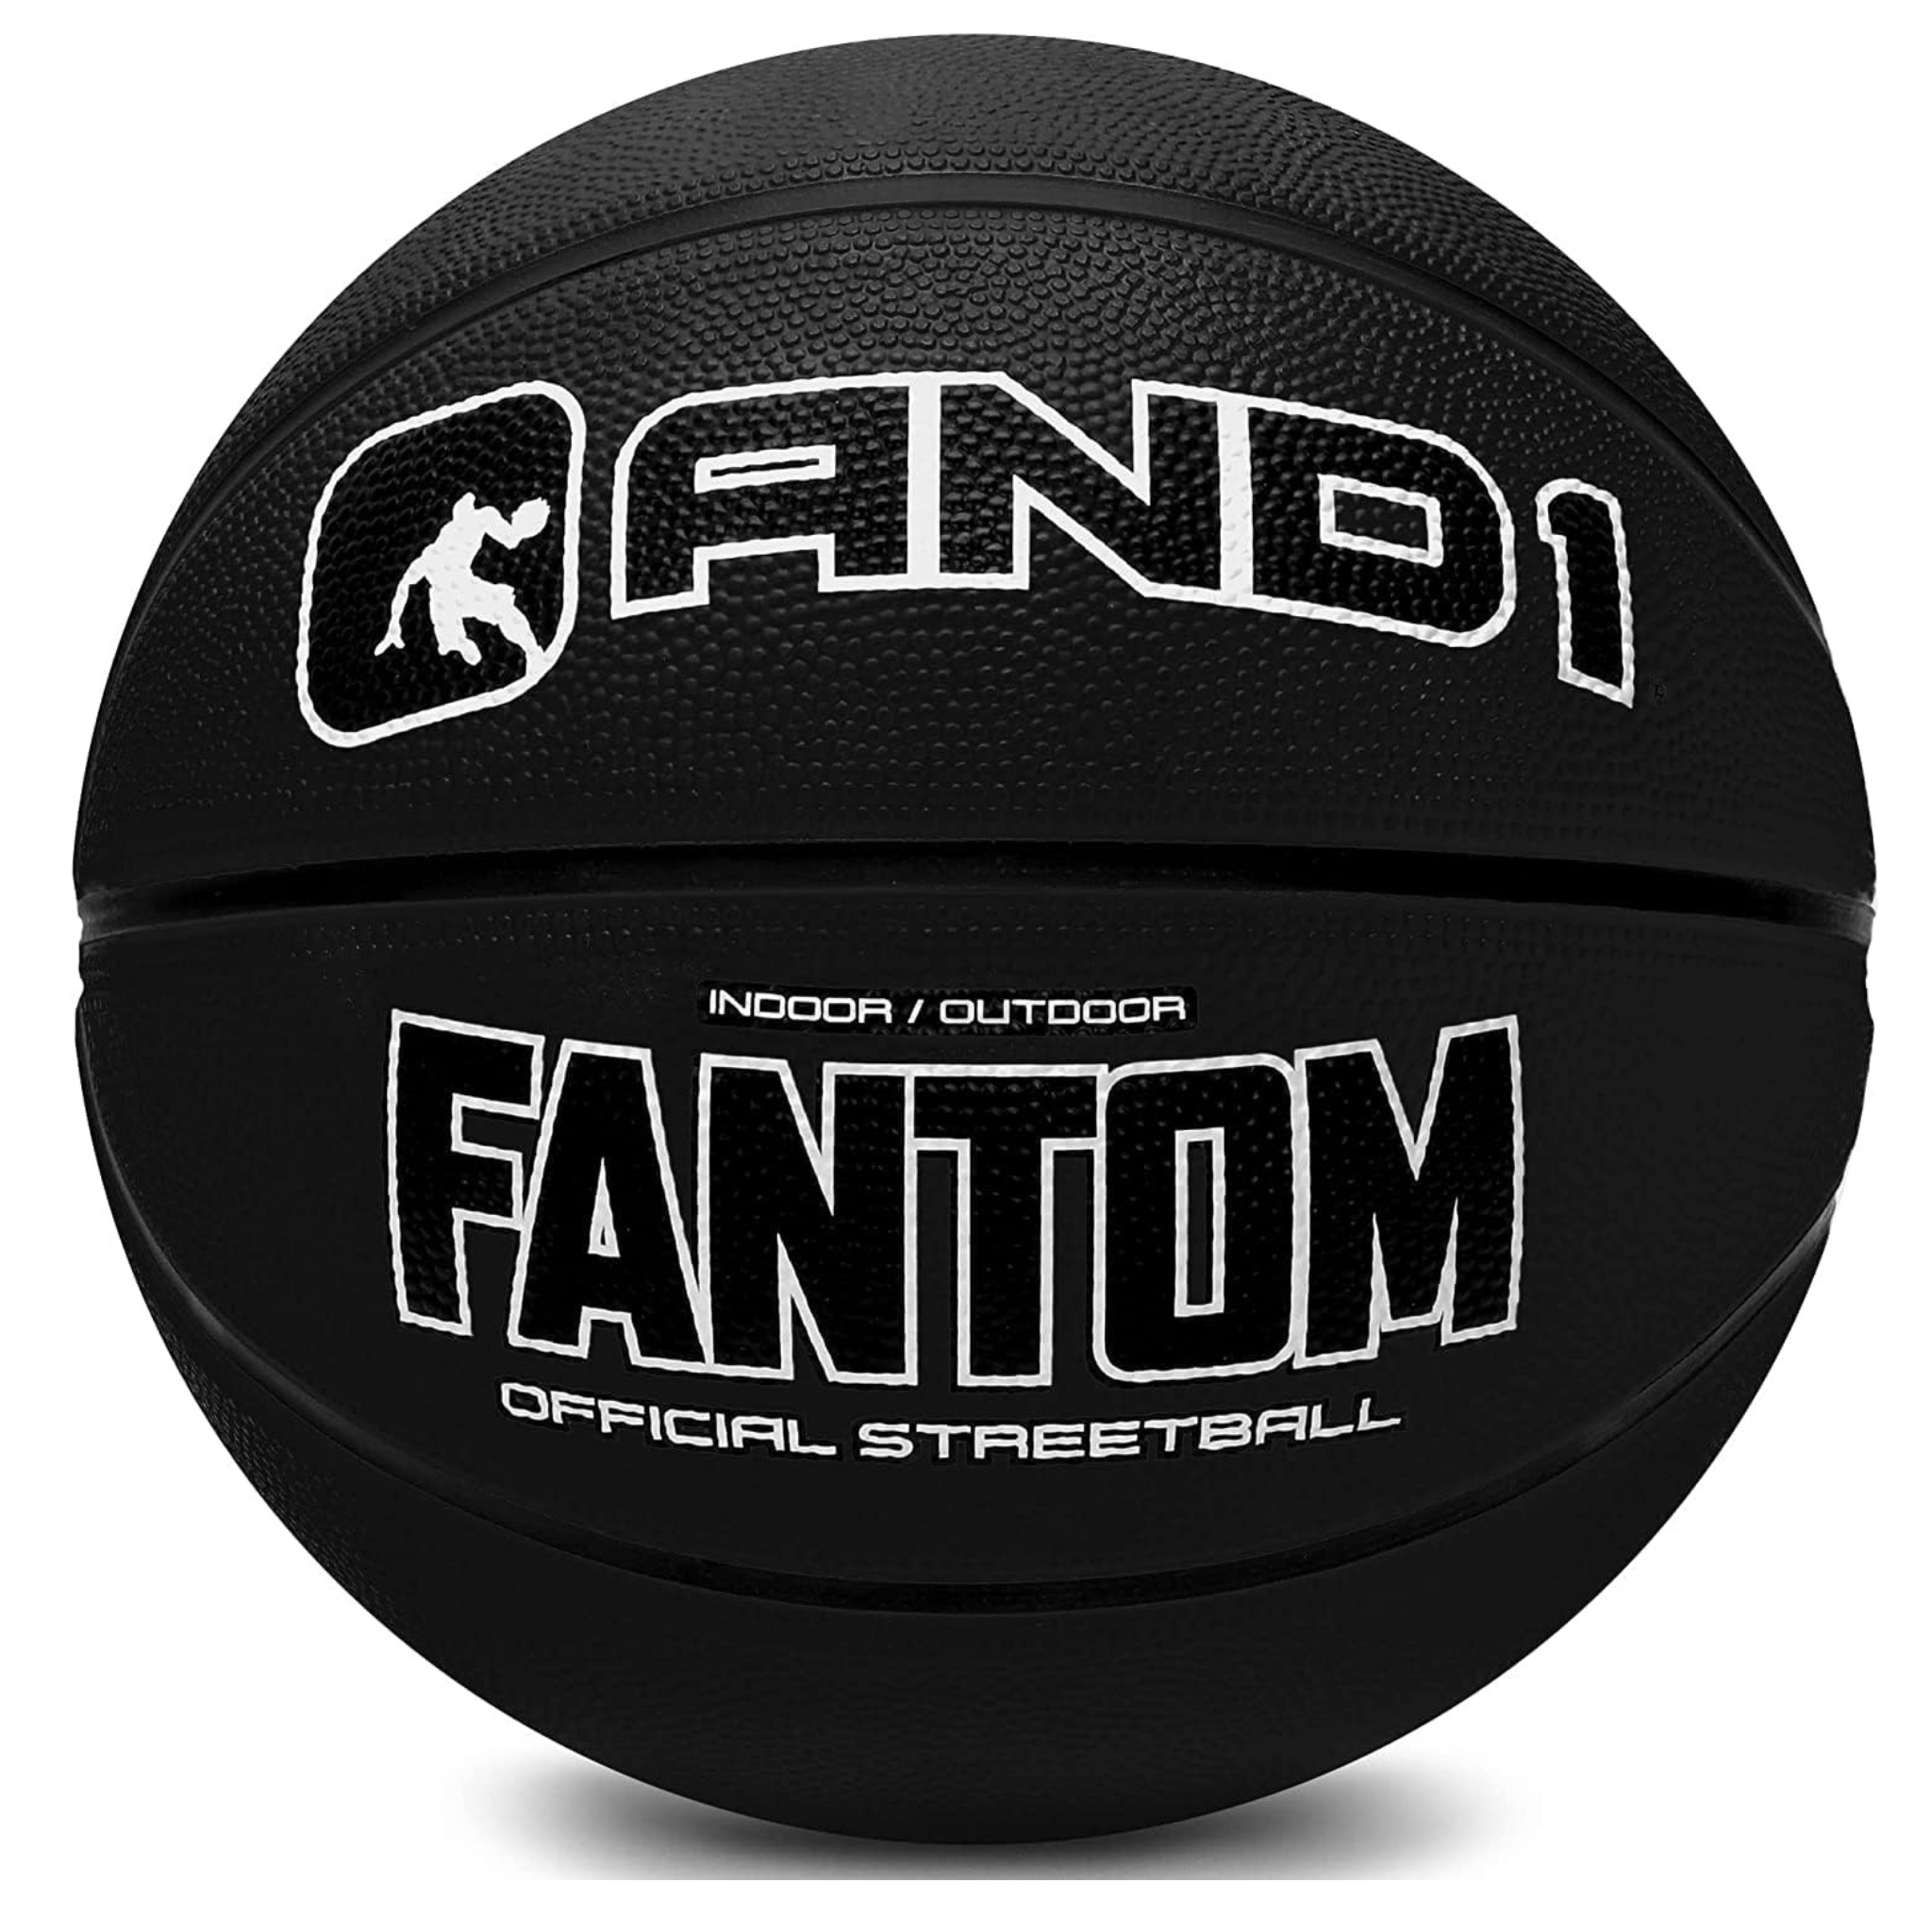 AND1 Fantom Rubber Basketball Official Size Streetball